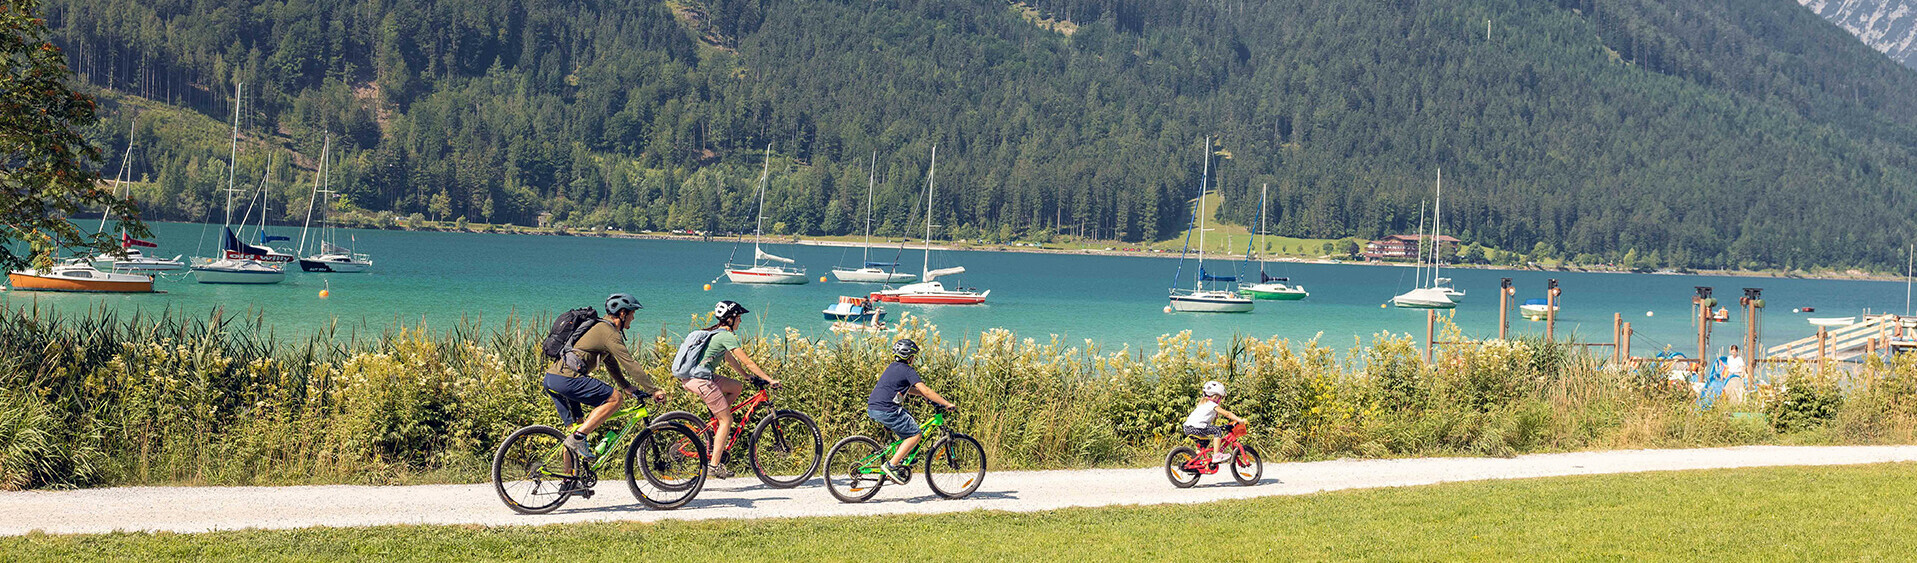 A family with children explores the lakeshore in Maurach am Achensee by bike. In the background of this photo are several sailboats.